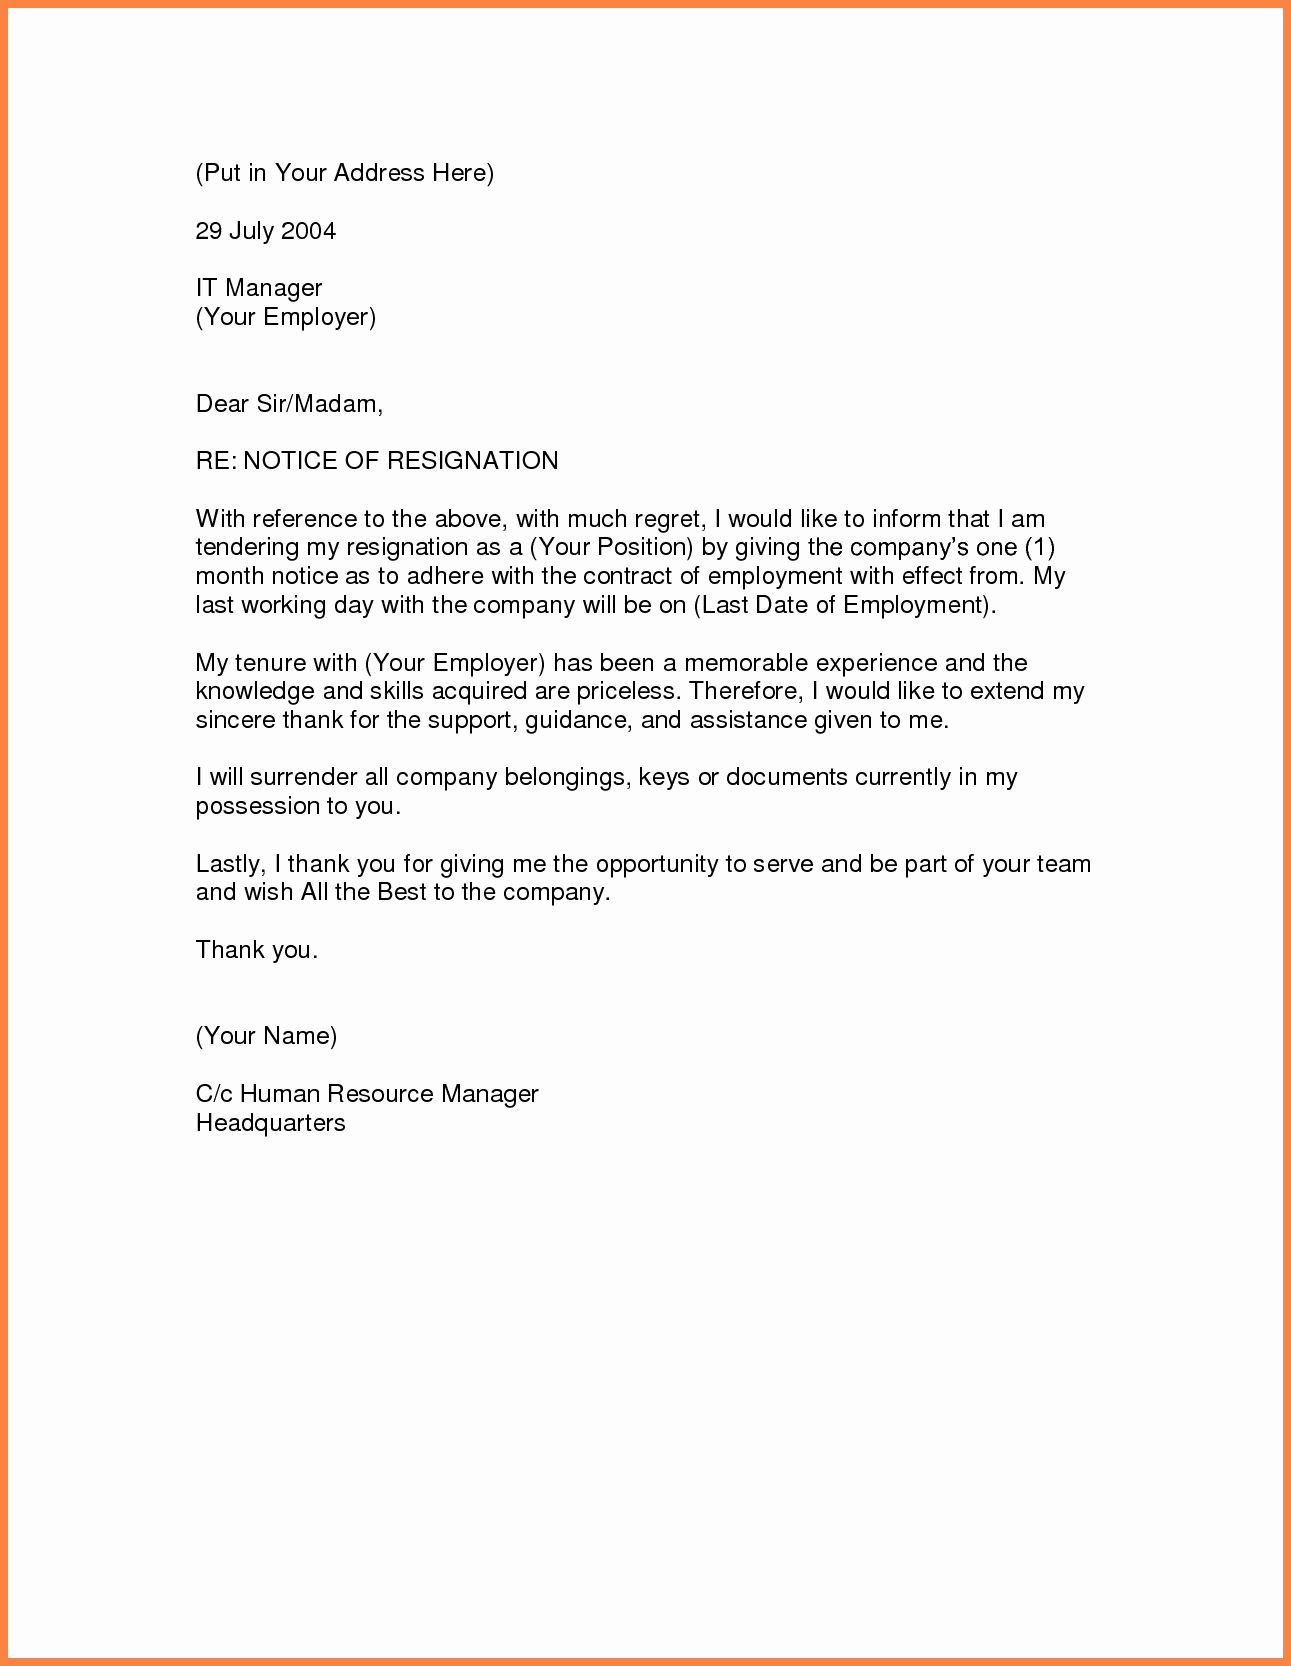 Resignation Letter Short Notice Awesome 7 Resignation Letter with Short Notice